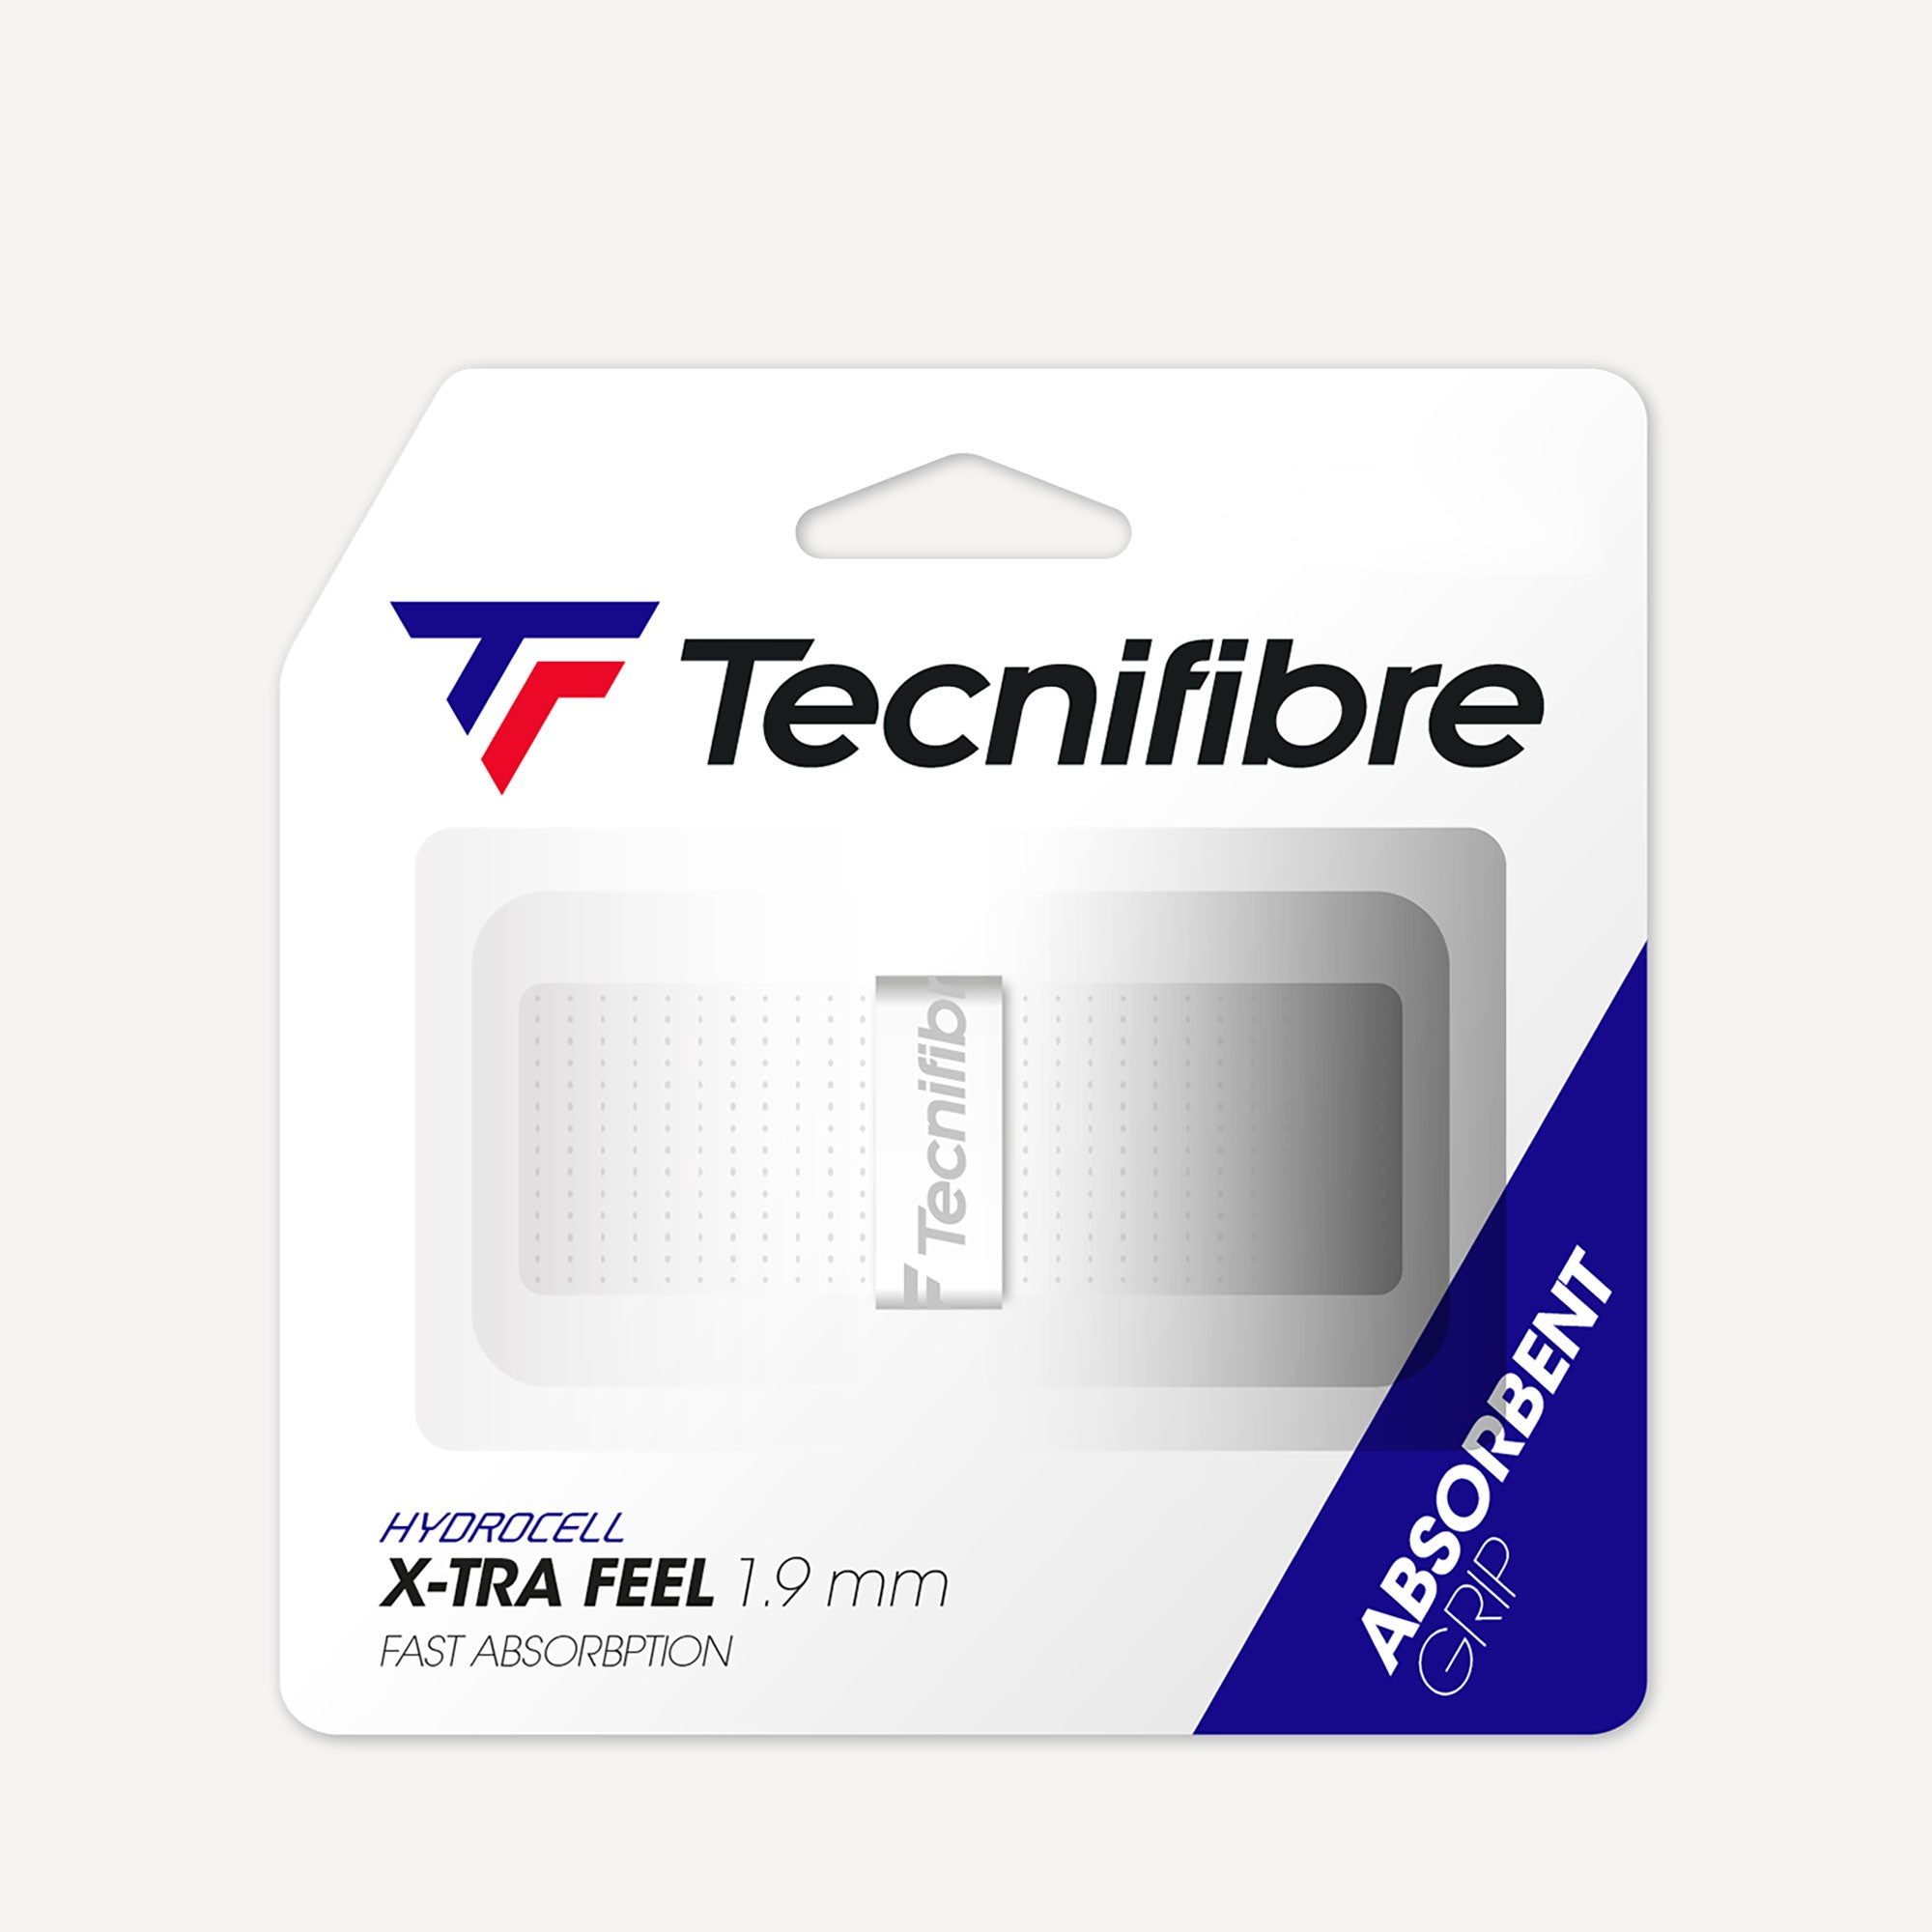 Tecnifibre Xtra Feel Replacement Grip - White (1)